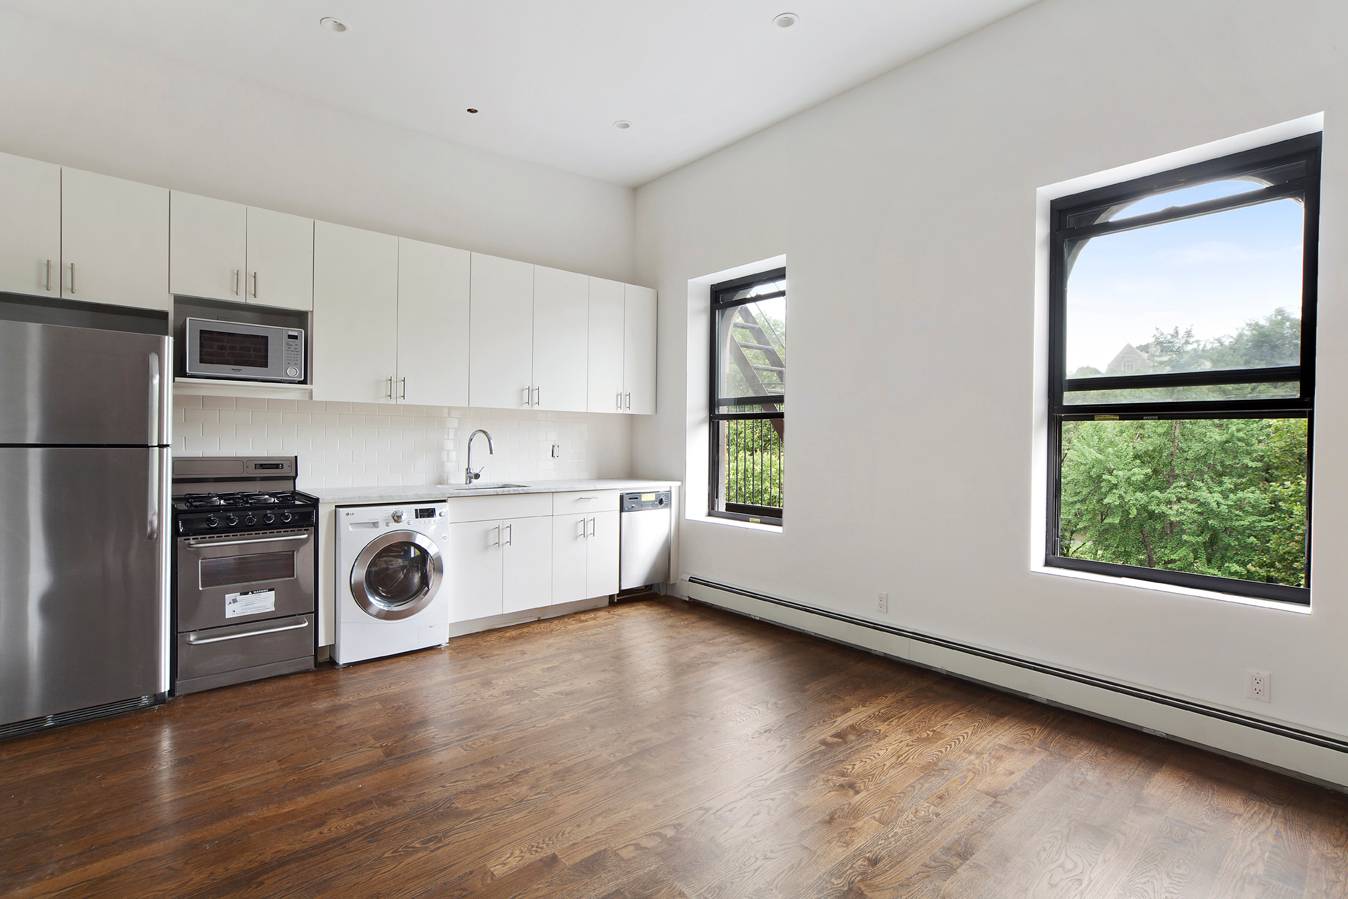 280 MANHATTAN AVE | BRAND NEW RENOVATED PRE-WAR RENTAL BUILDING | 2 BEDOOM | 1 BATH APARTMENT WITH CONDO FINISHES | W/D IN THE UNIT | MORNINGSIDE PARK VIEWS